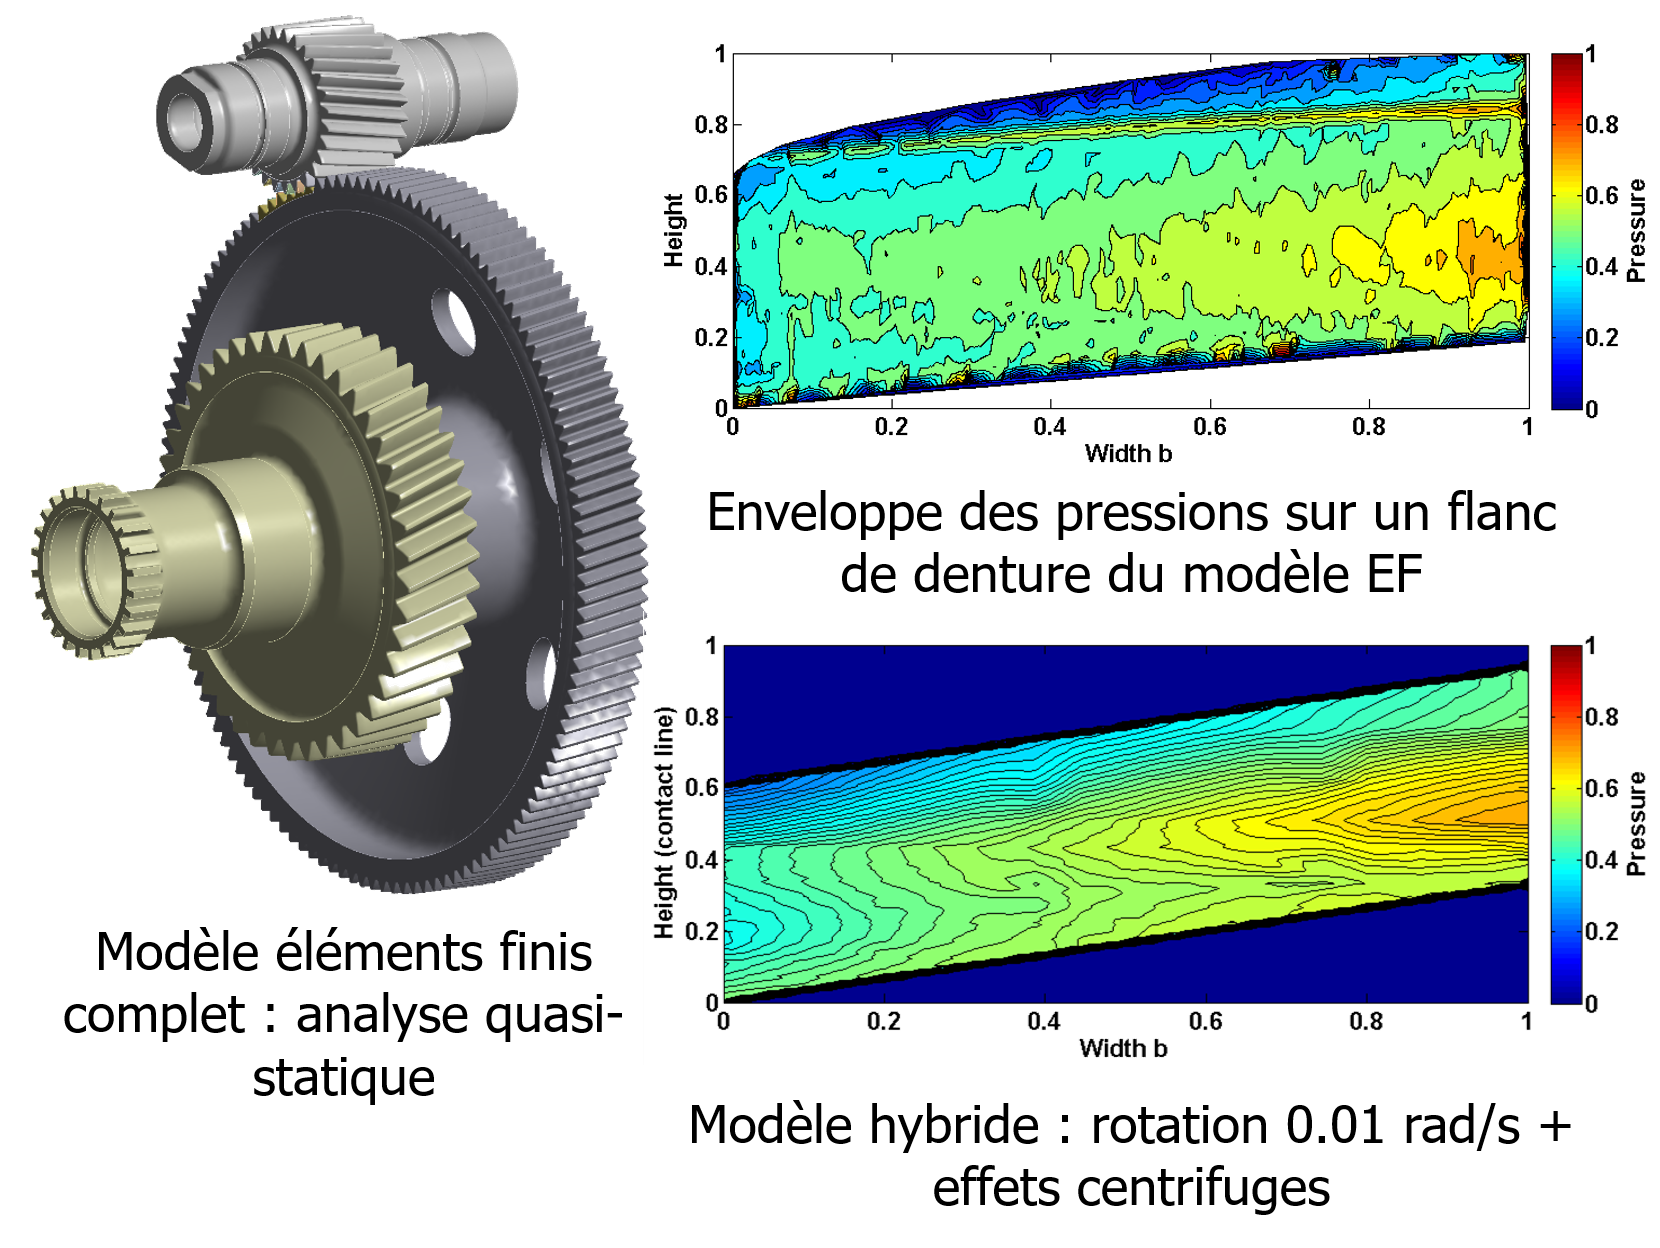 Validation of the hybrid modular model: Comparison of tooth pressure with an EF model for thin-walled gears (source: CIFRE Safran Helicopter Engines PhD by B. Guilbert)